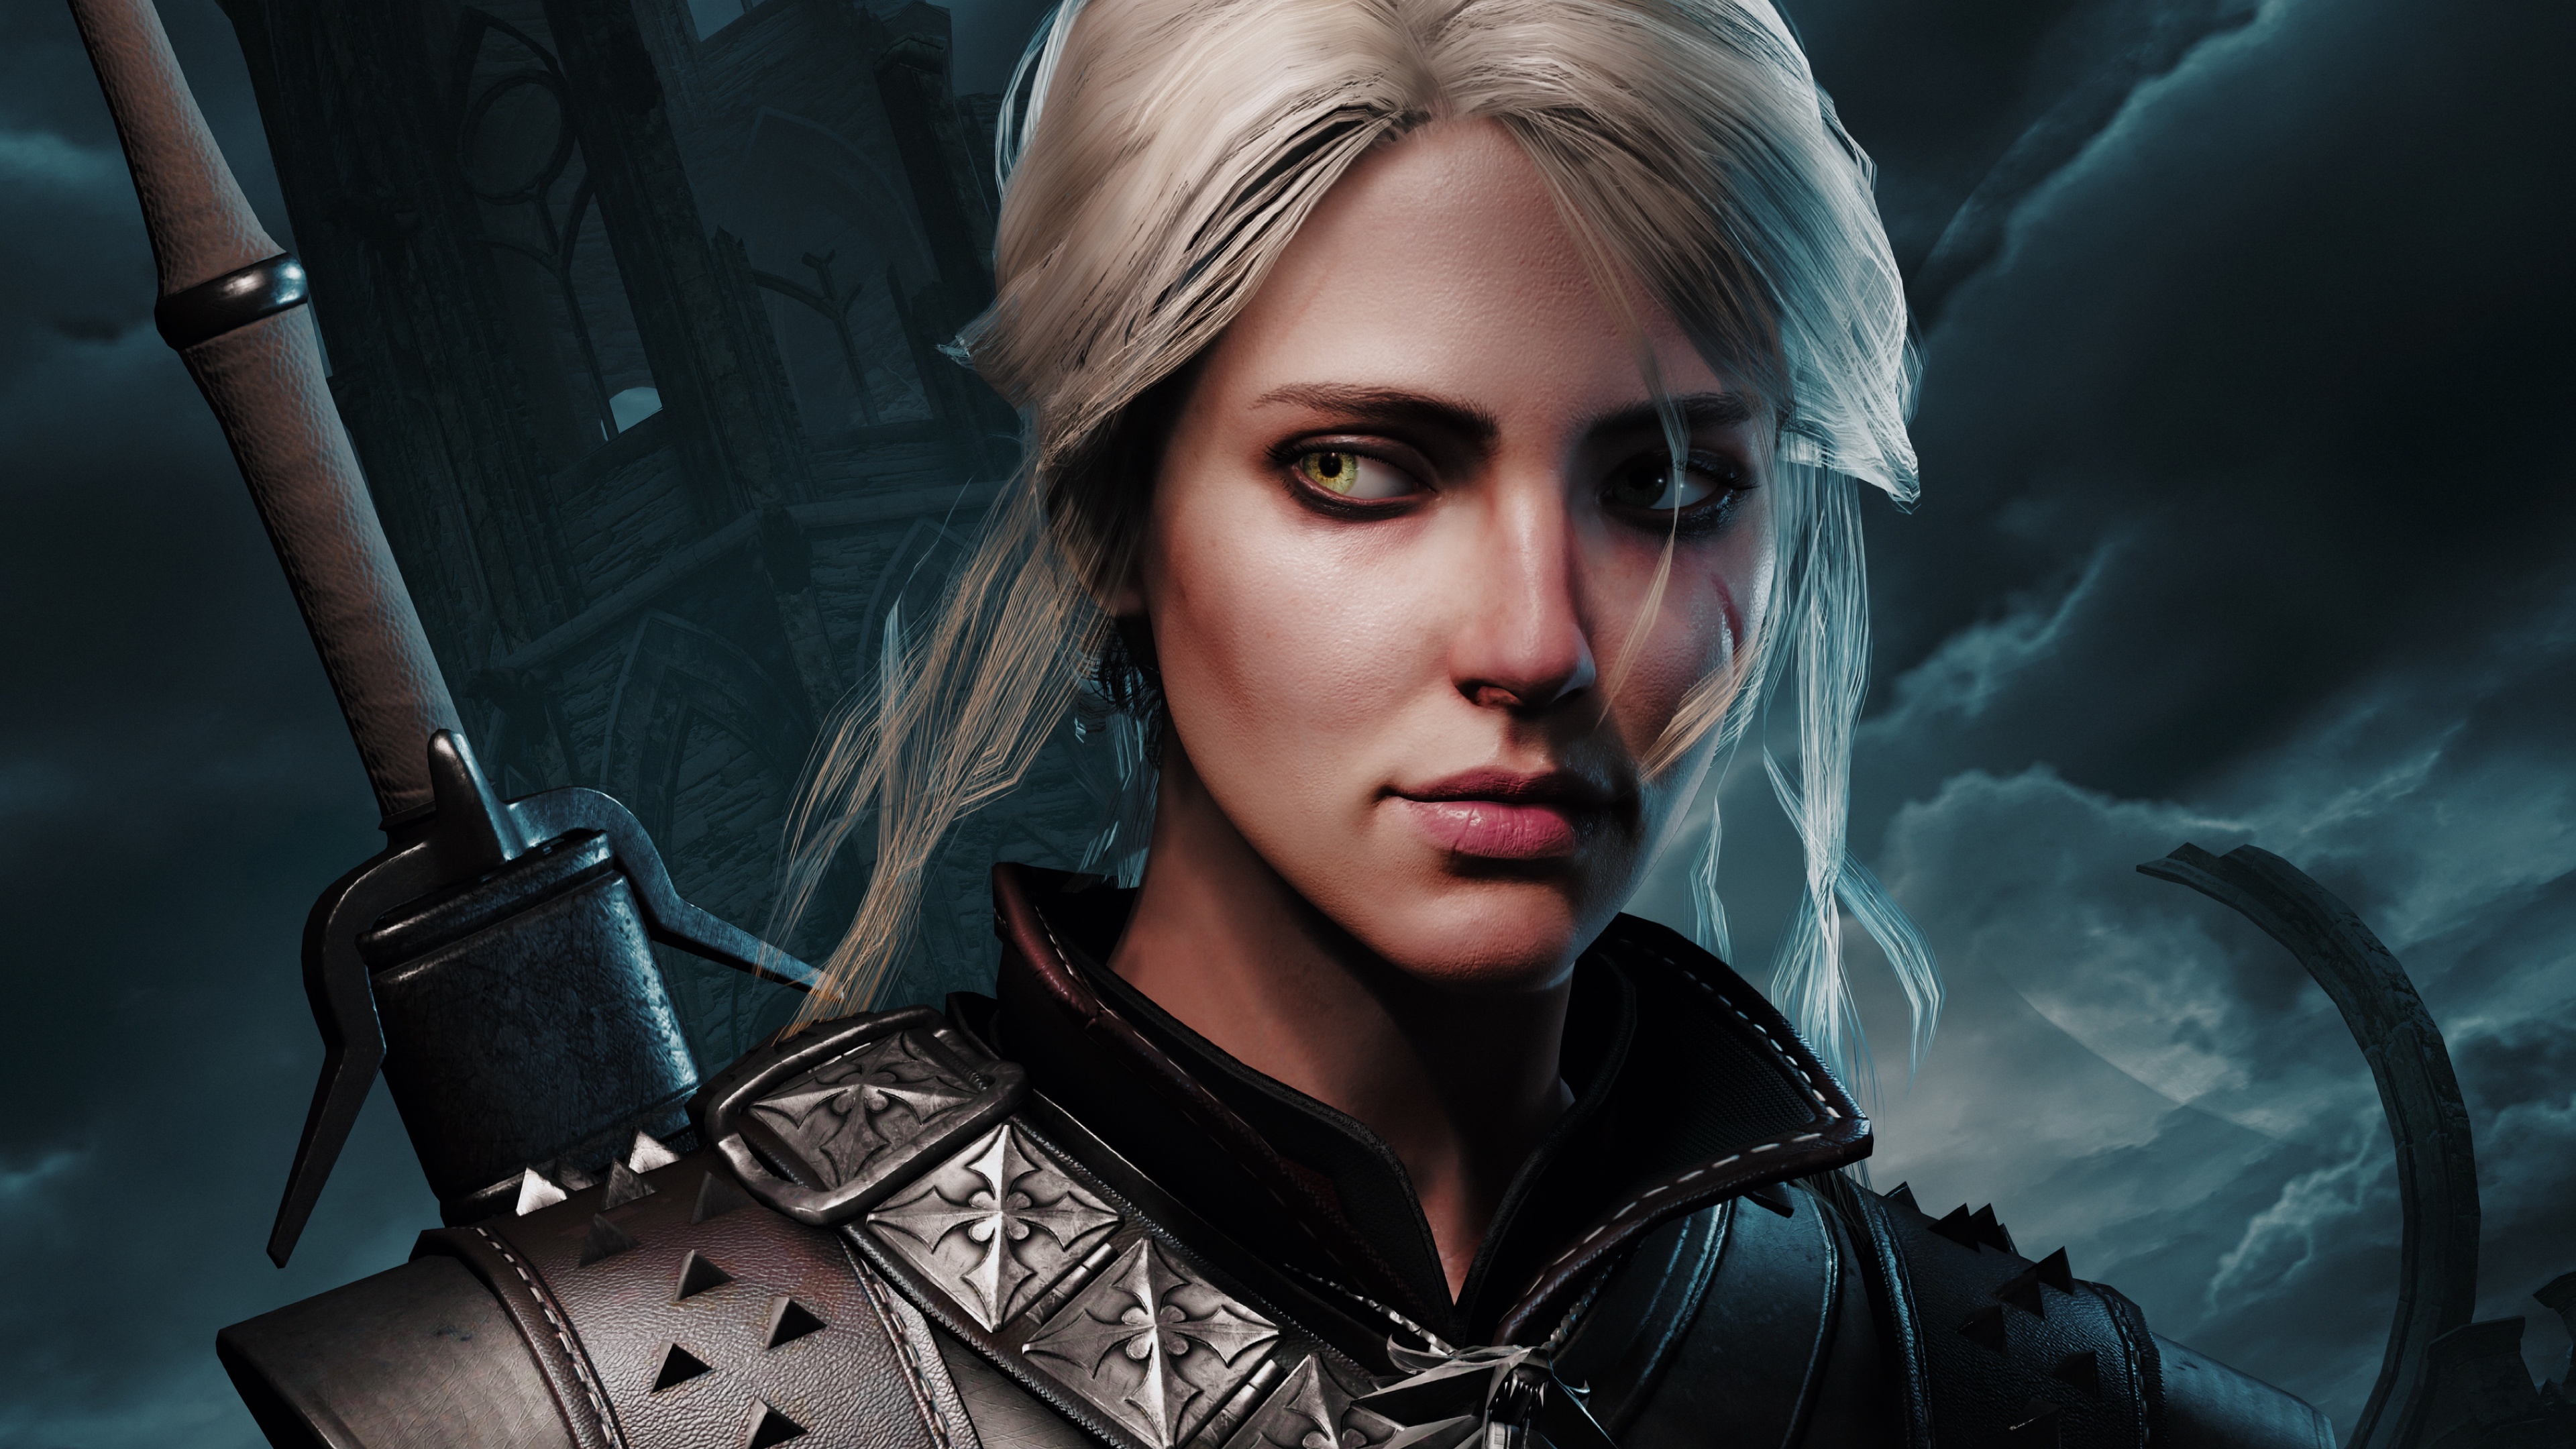 130 The Witcher HD Wallpapers and Backgrounds